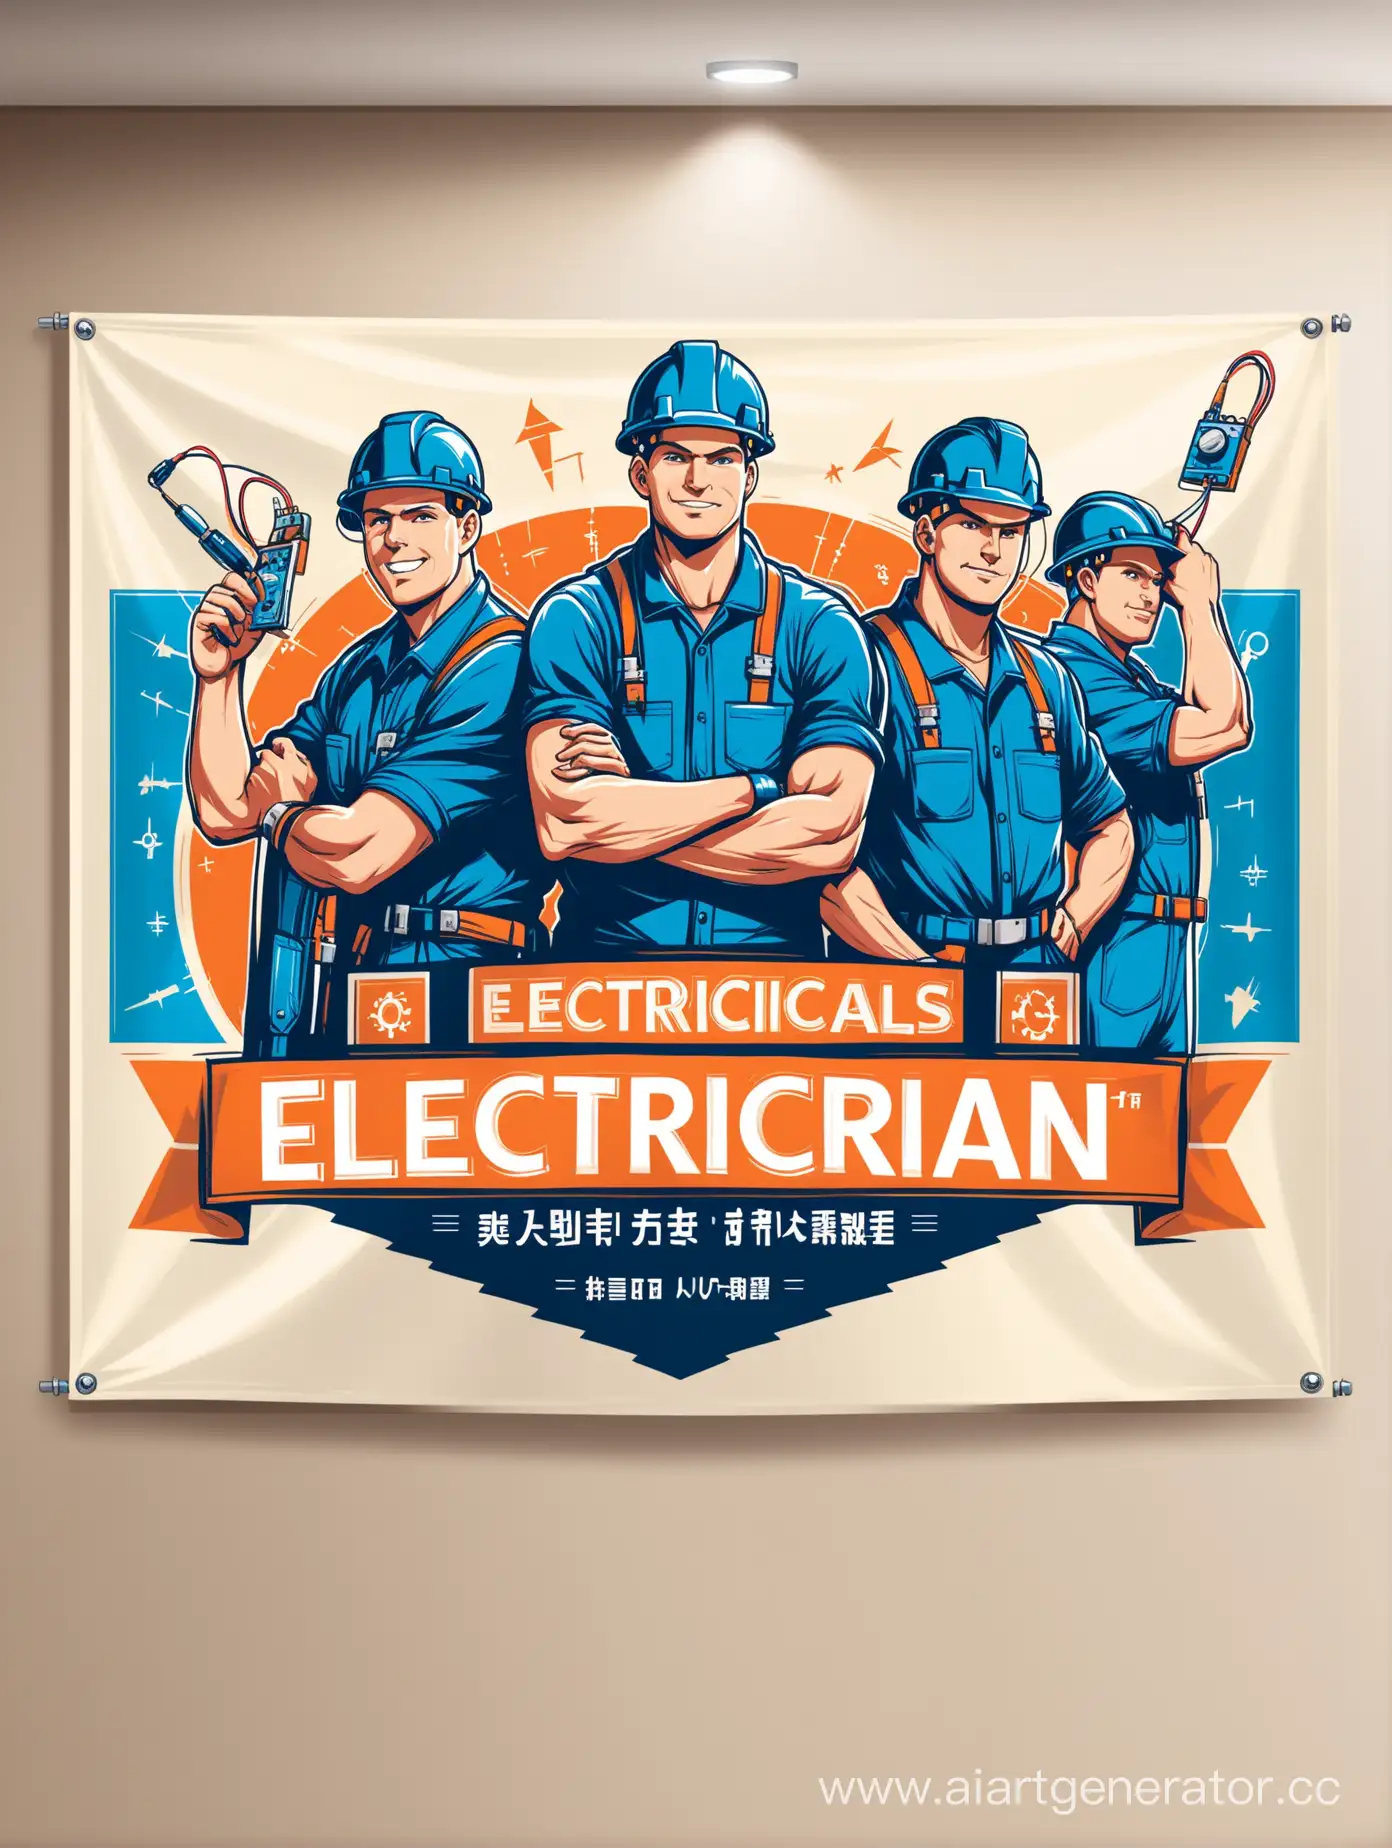 Electricians-in-Action-Powering-Up-the-Community